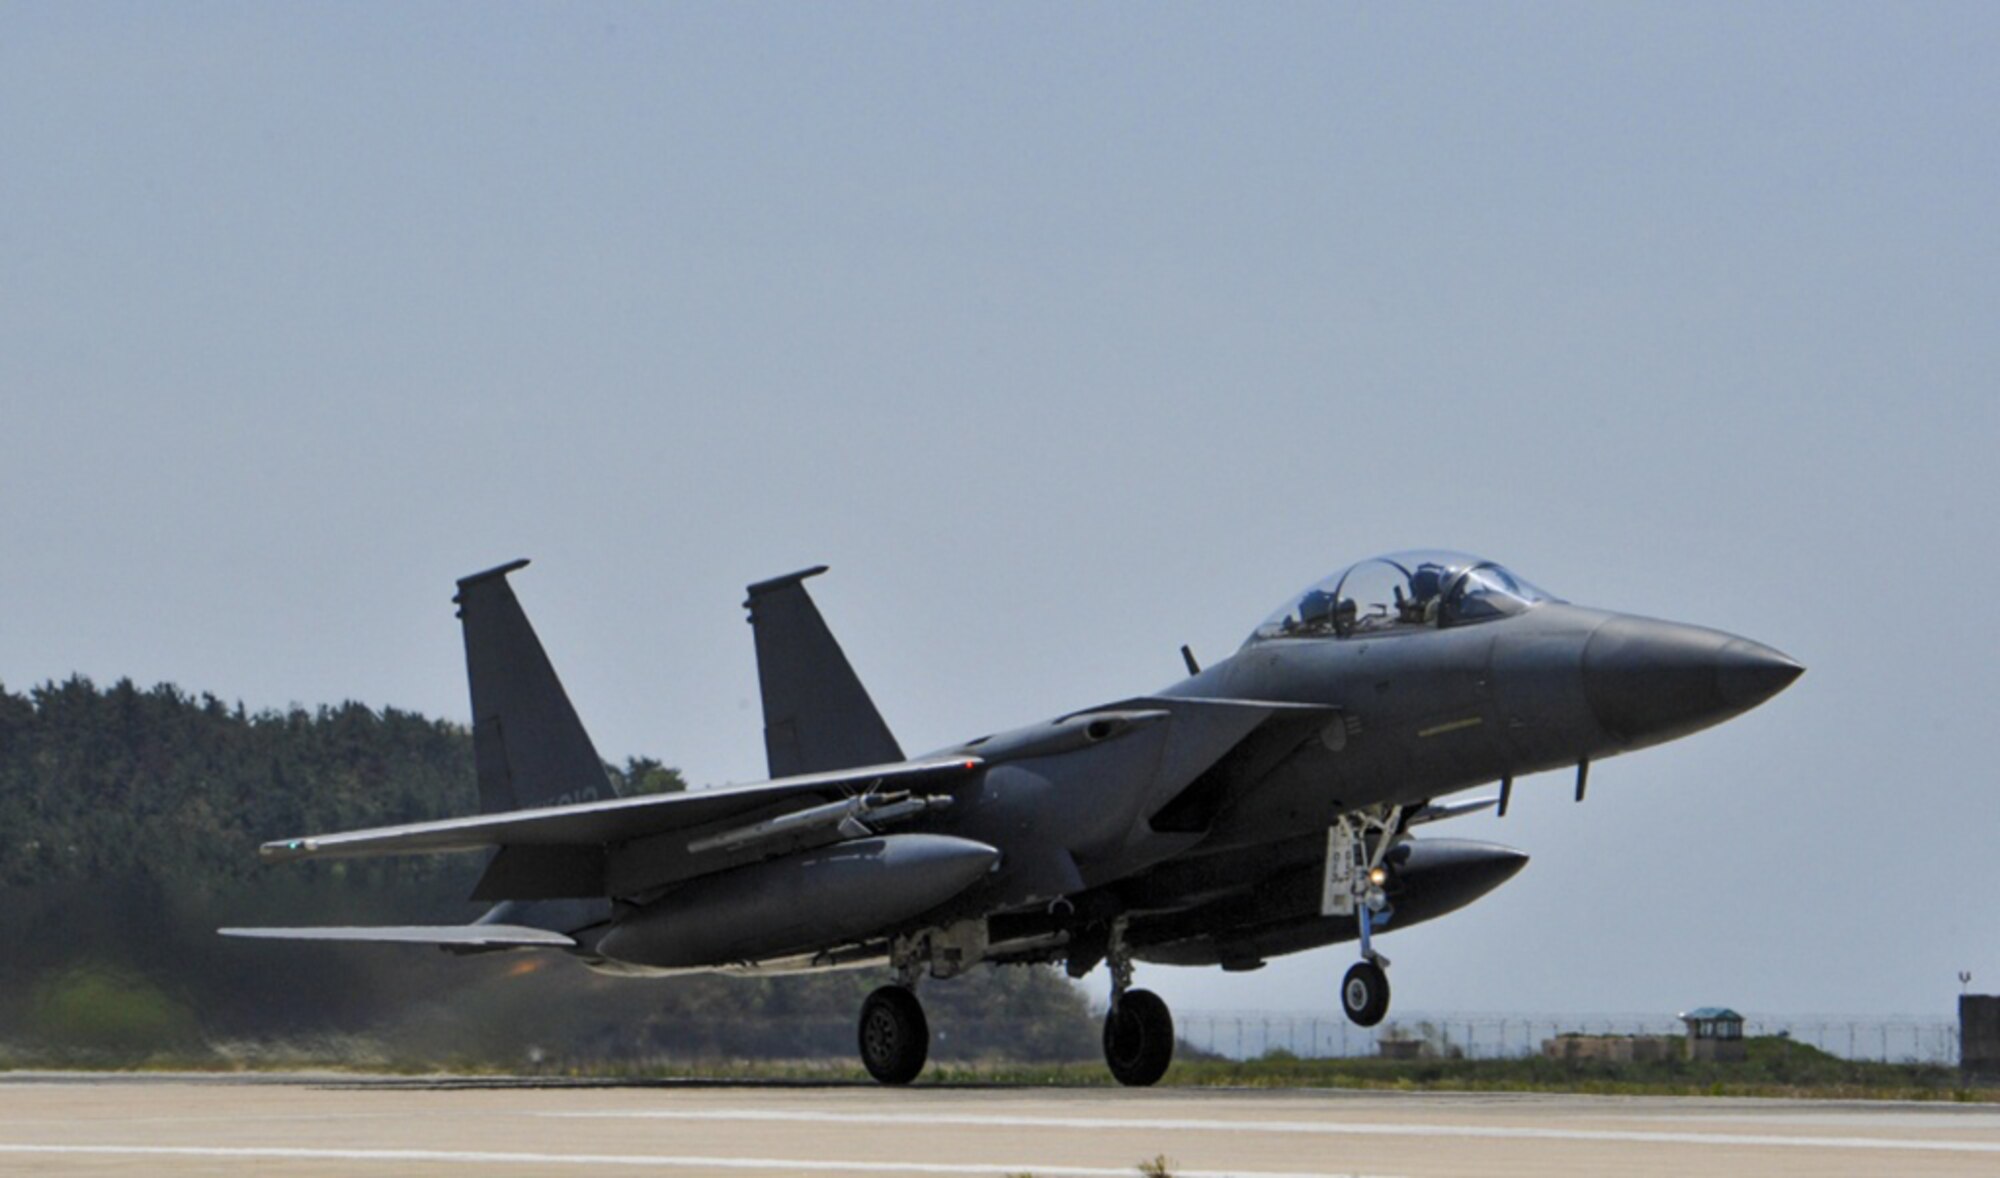 (April 27, 2017) - A Republic of Korea Air Force F-15K Slam Eagles from the 11th Fighter Squadron, Daegu Air Base, ROK, takes off during Exercise MAX THUNDER 17 at Kunsan Air Base, Republic of Korea, April 27, 2017. In Max Thunder, U.S. and ROK air forces consistently train together to be ready around-the-clock to defend the Republic of Korea. The interoperability and trust developed between the allies in training is critical to ensure U.S and ROK are prepared for any challenge.